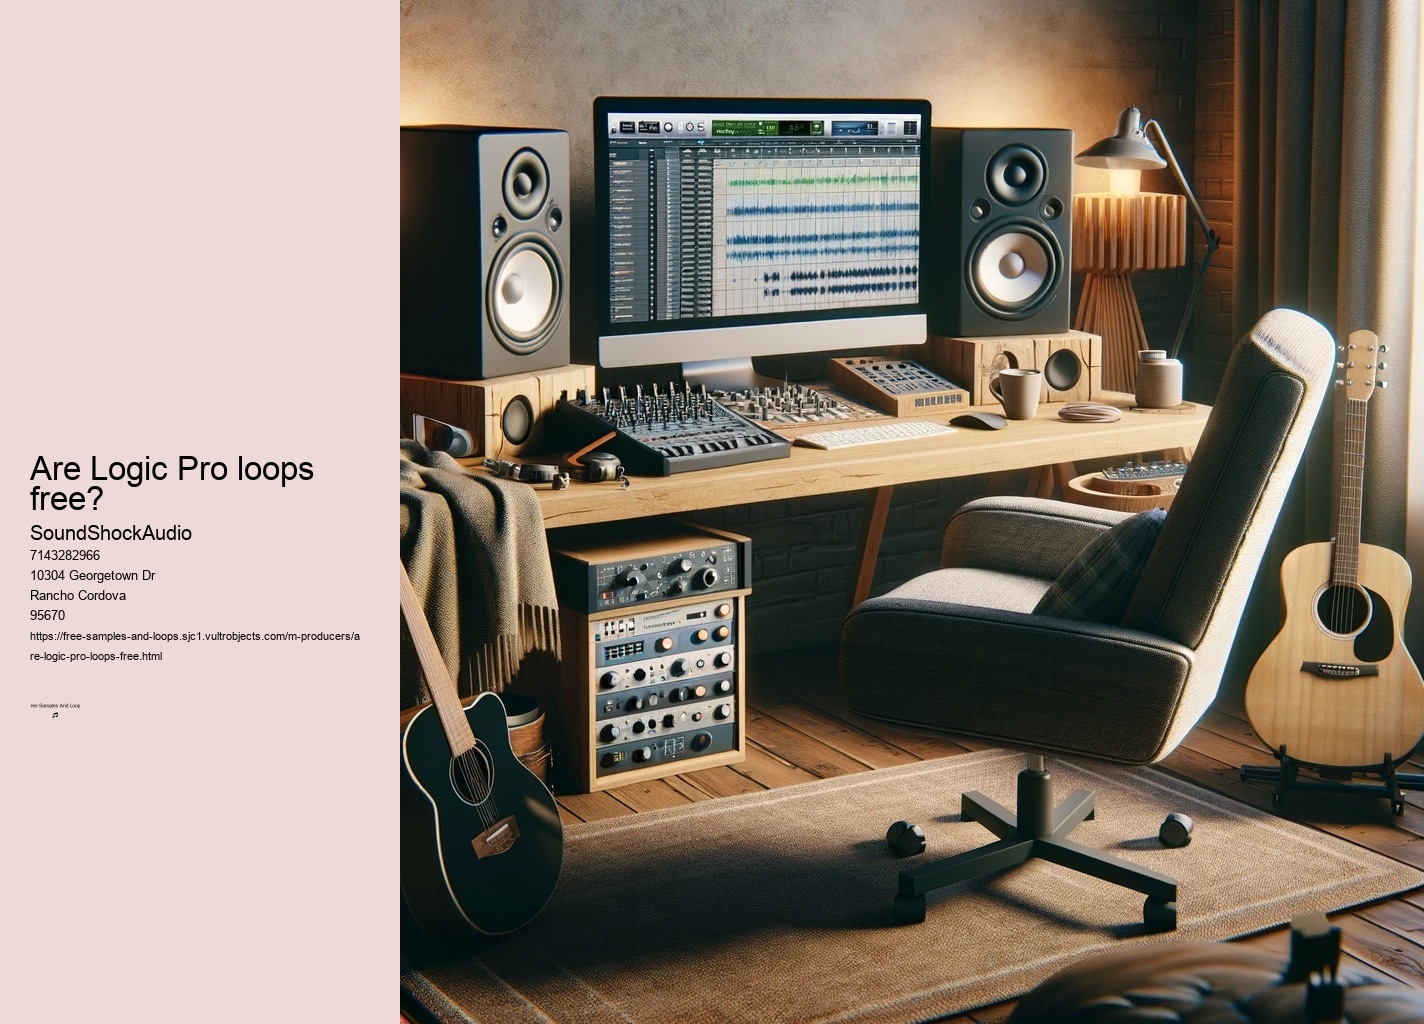 Are Logic Pro loops free?